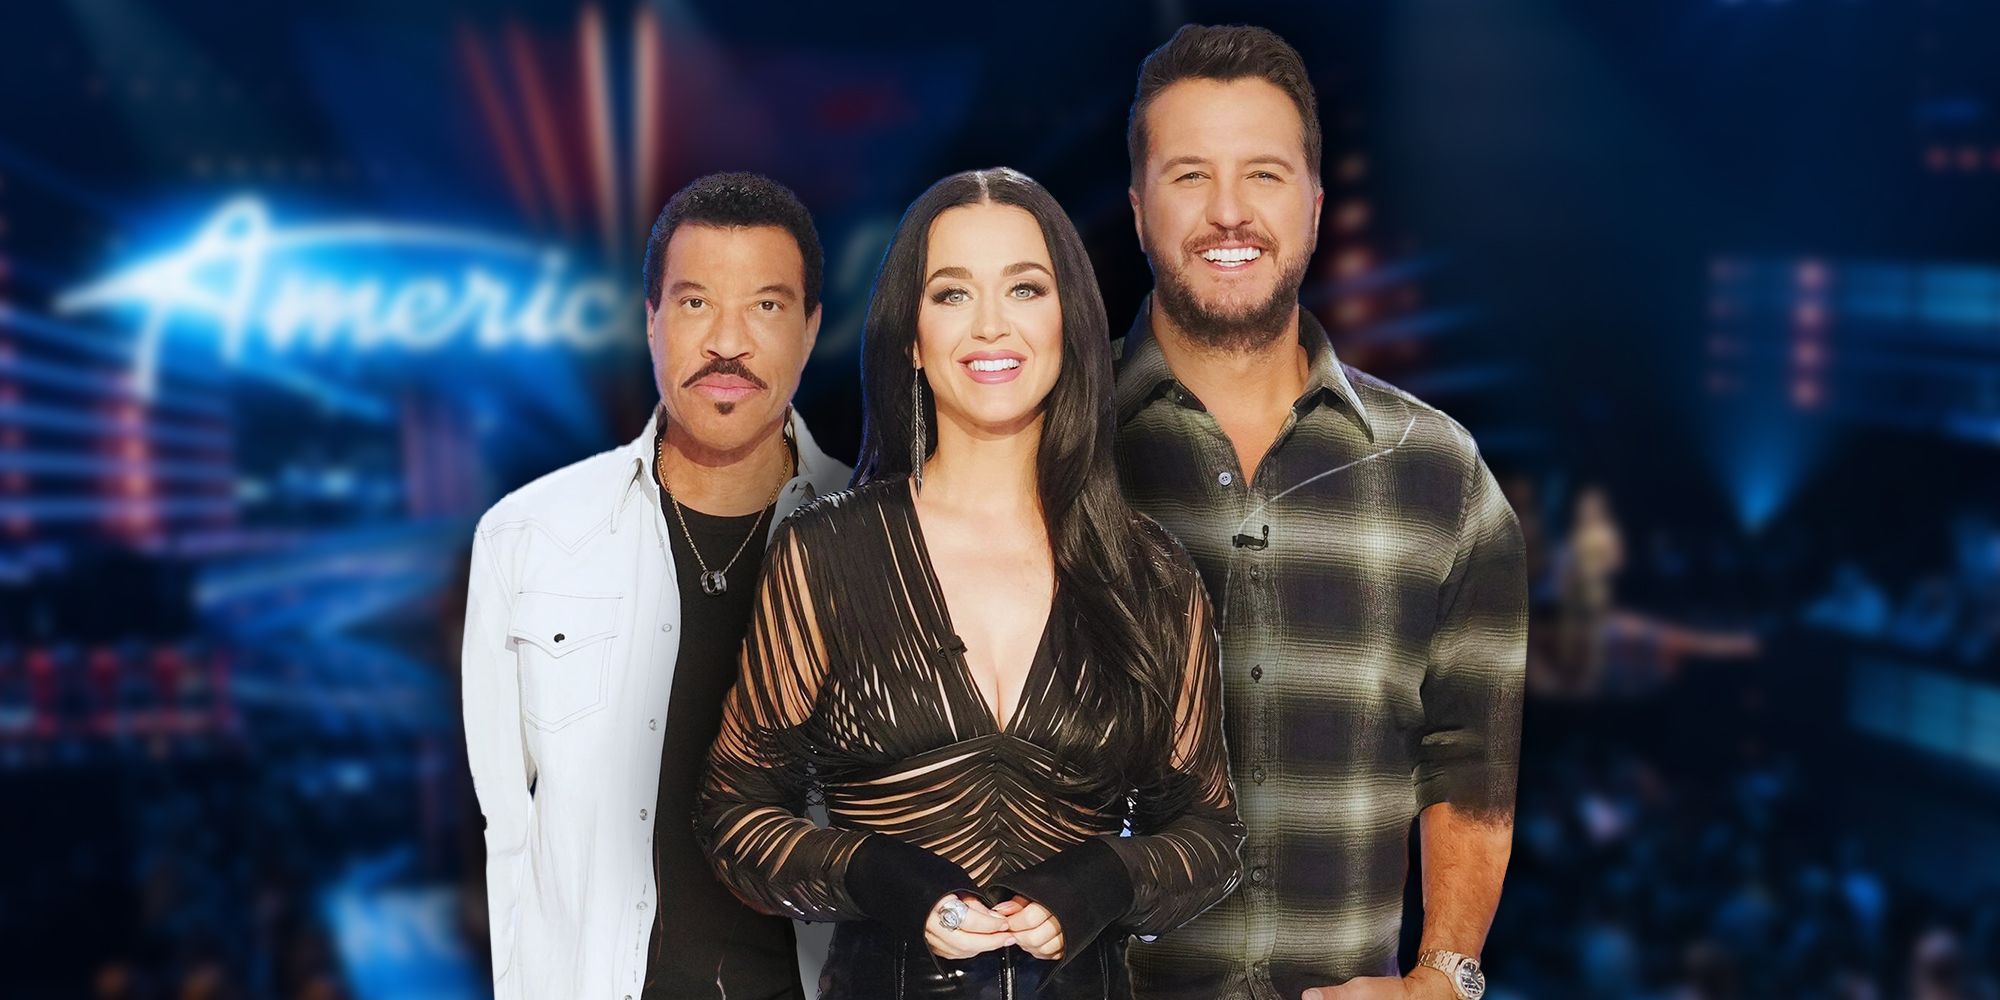 Lionel Richie, Katy Perry, and Luke Bryan from American Idol